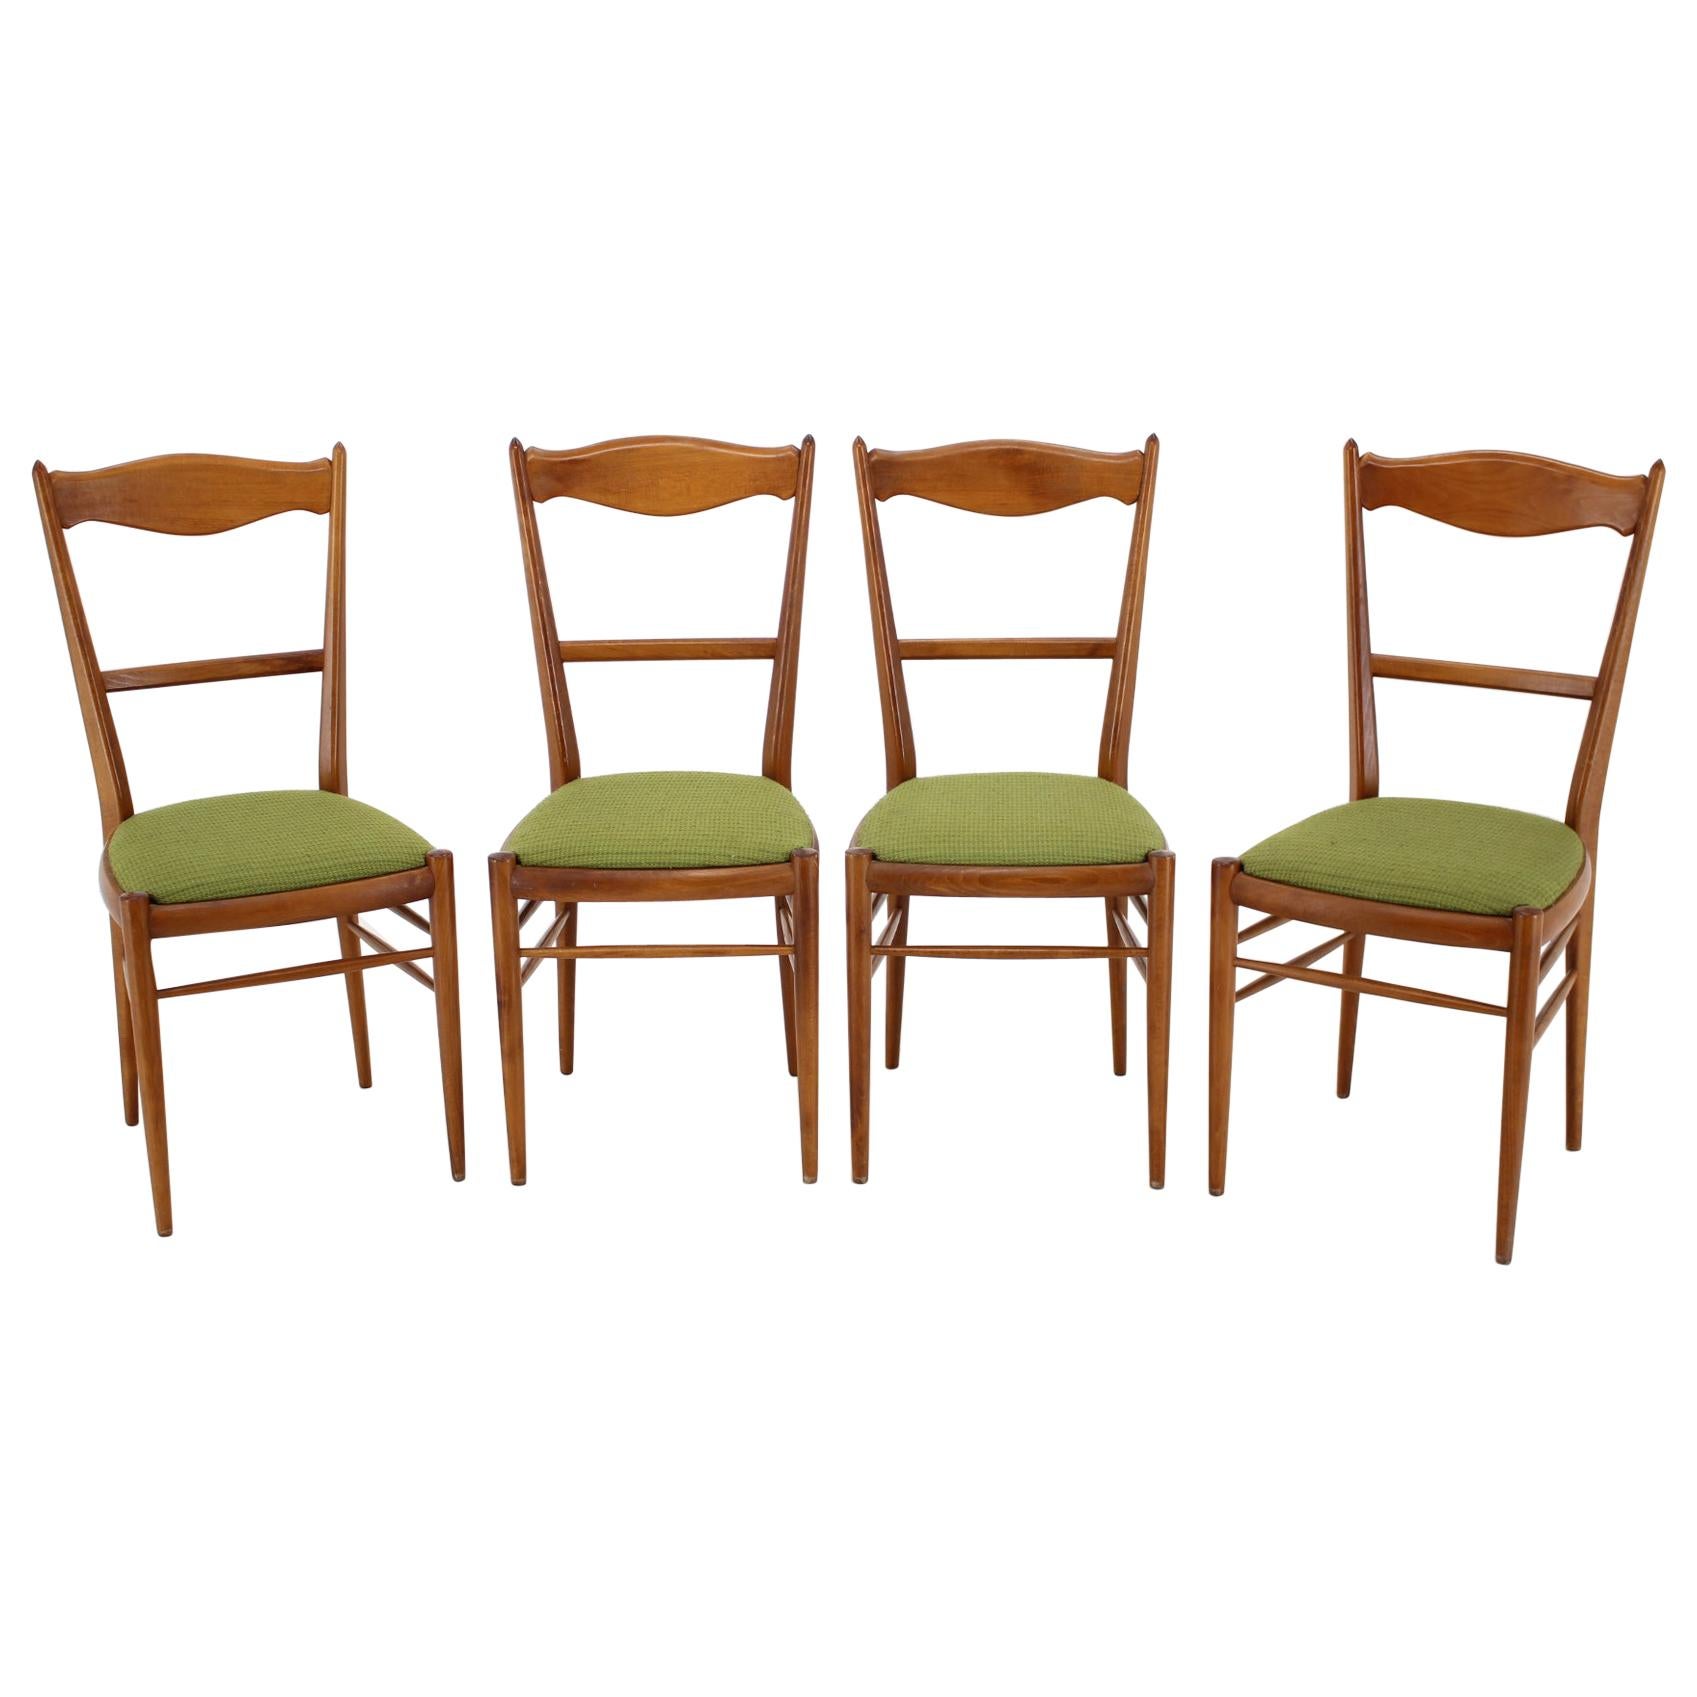 Set of Four Beech Dining Chairs, 1960s